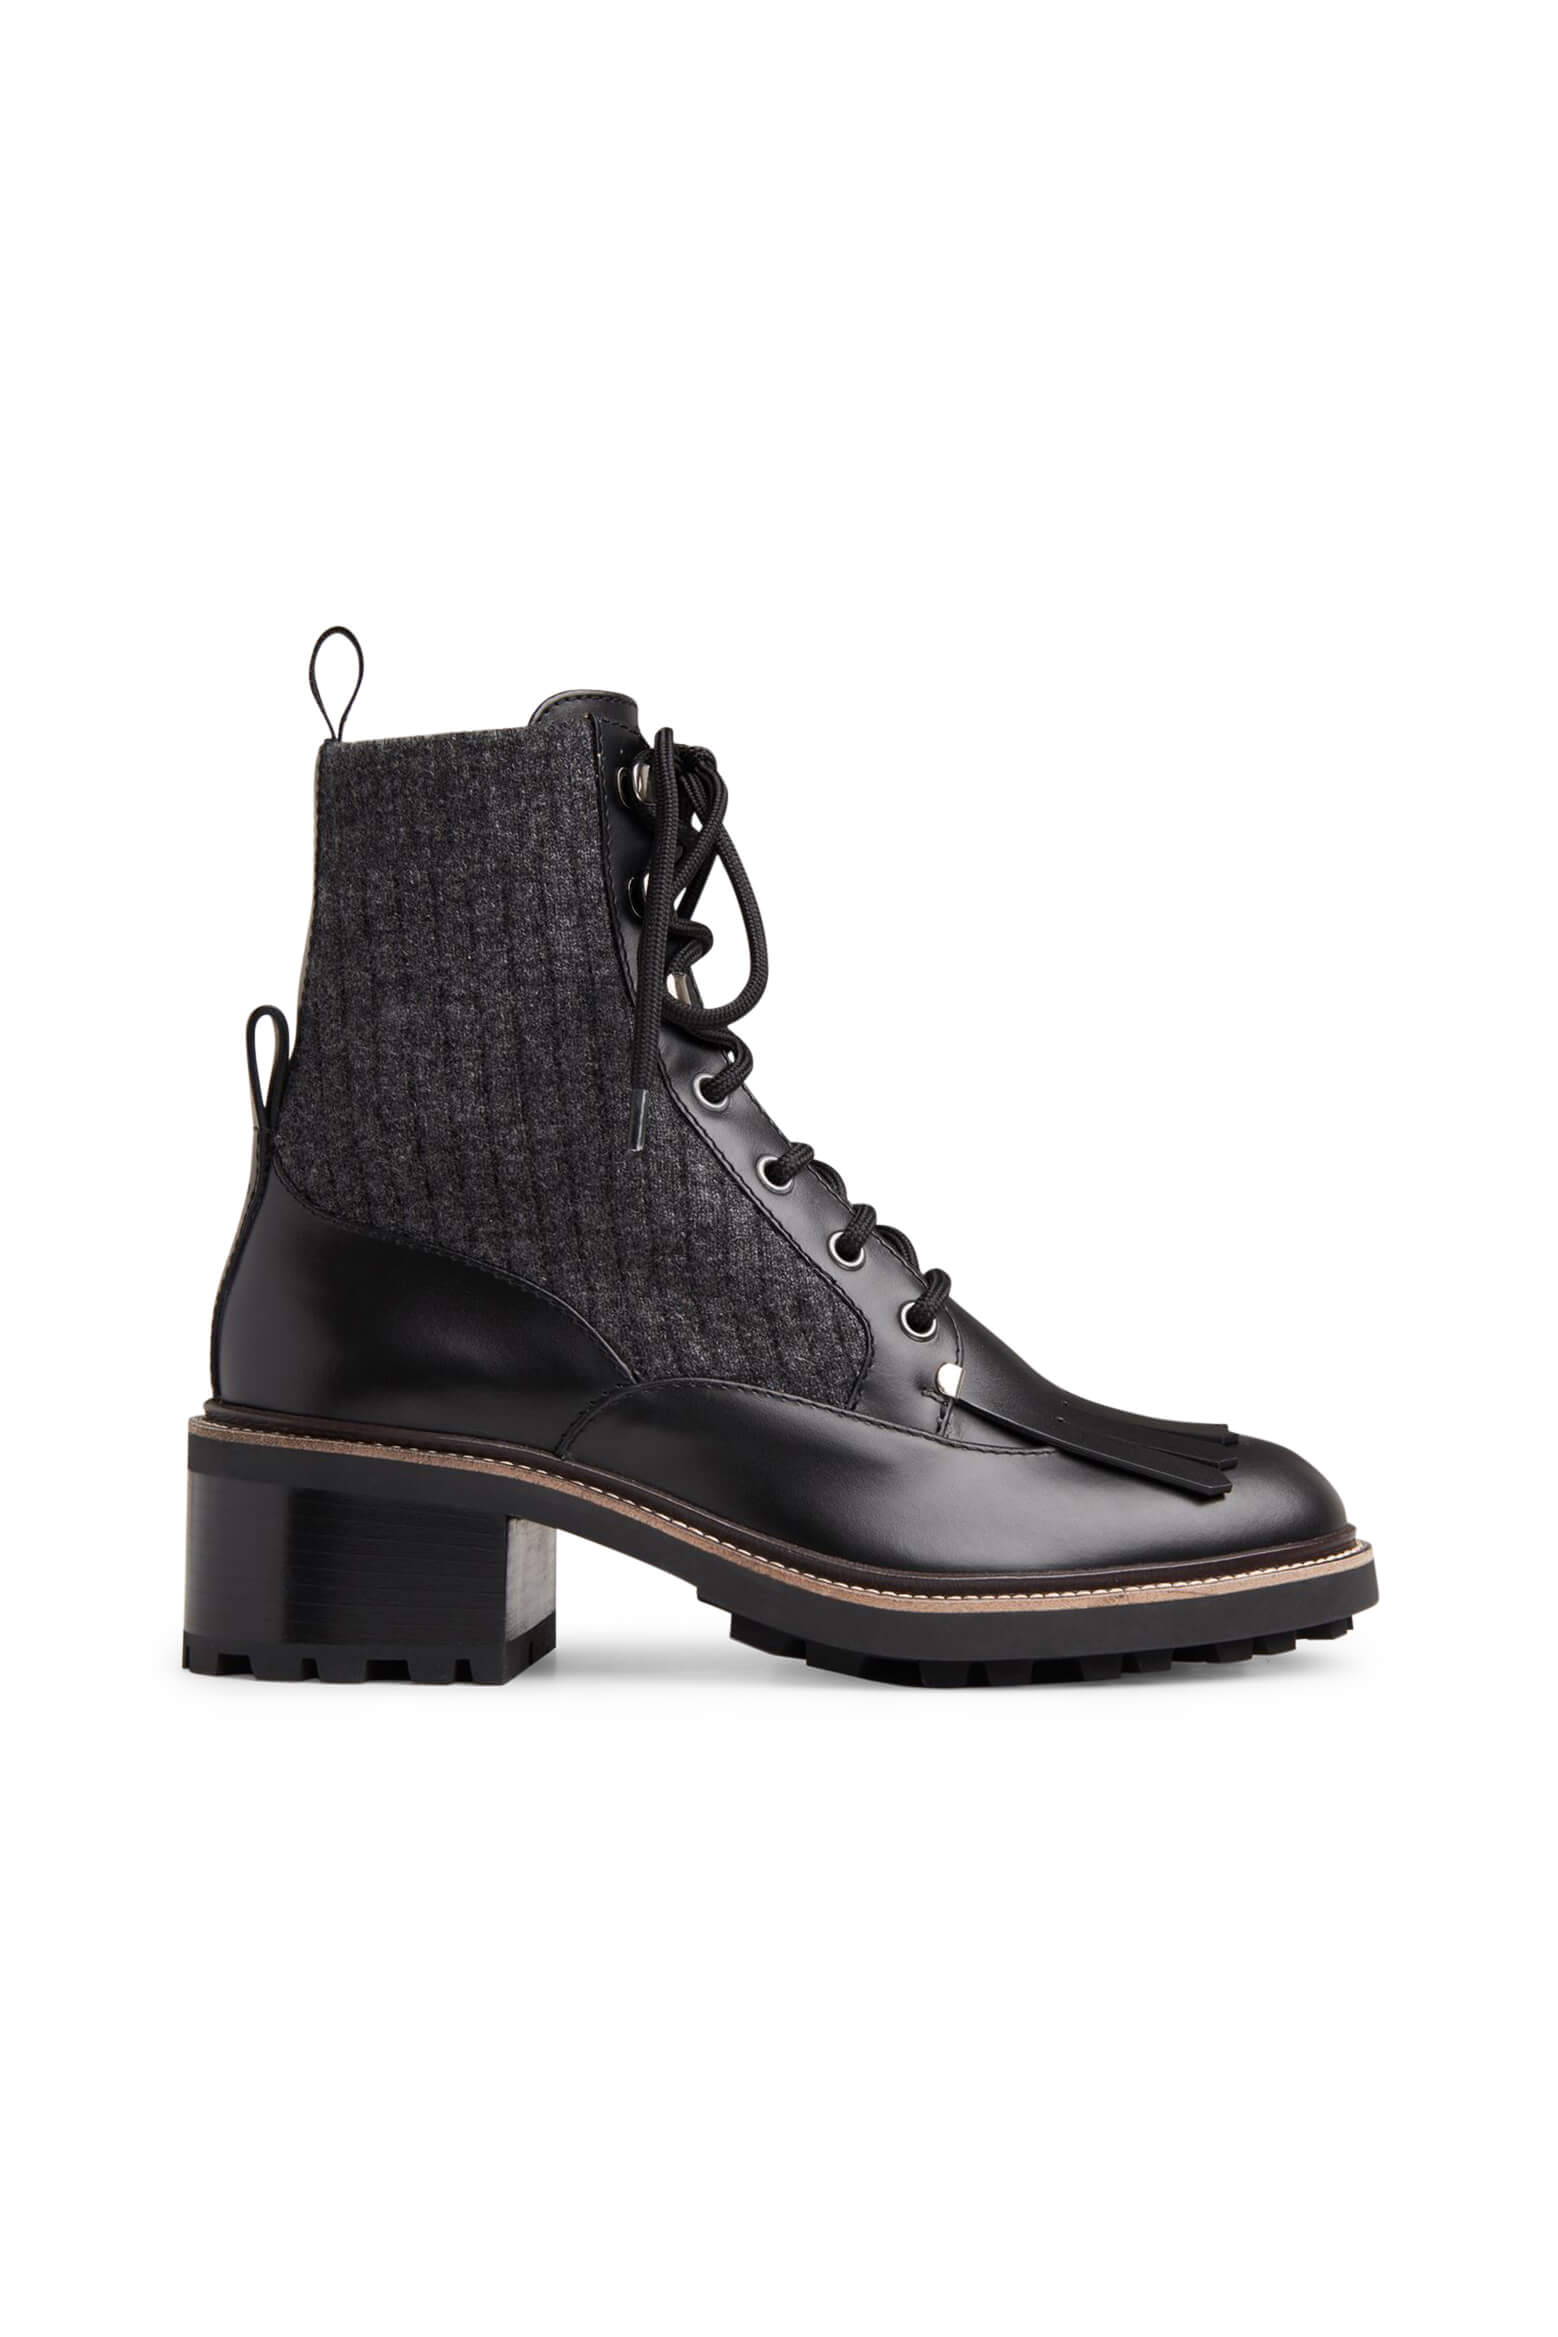 Chloe Franne Boot in Black from The New Trend